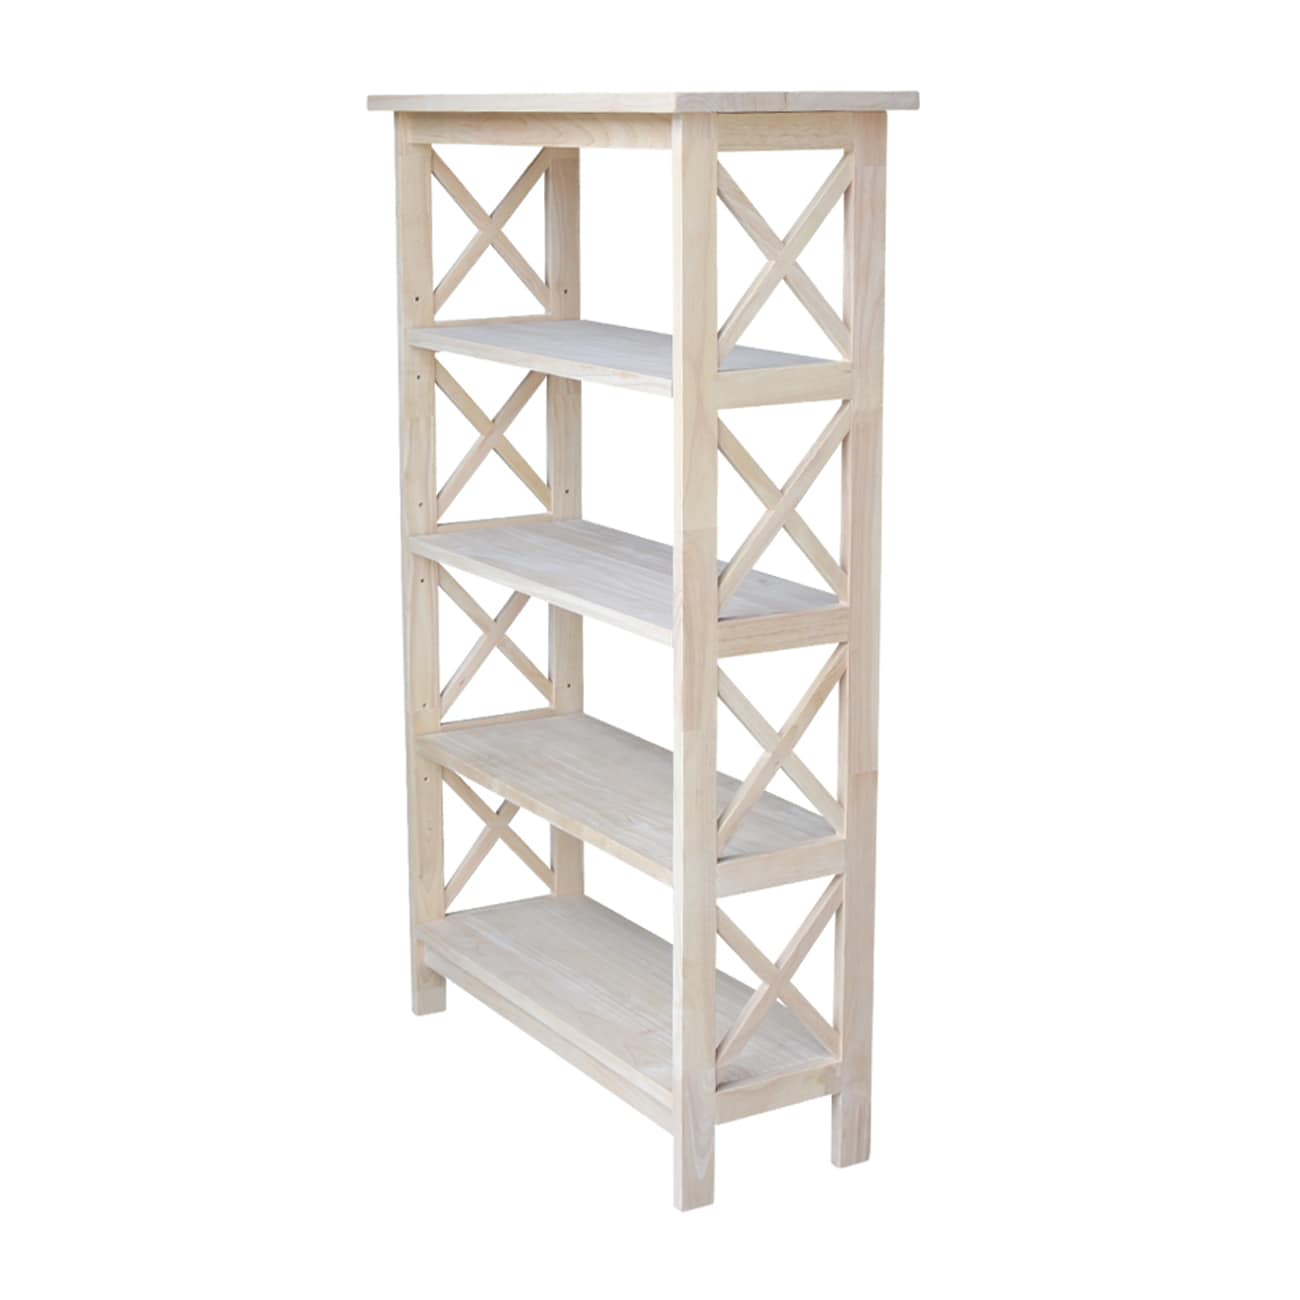 Unfinished Wood 4 Shelf Bookcase, Solid Wood Bookcases With Adjustable Shelves